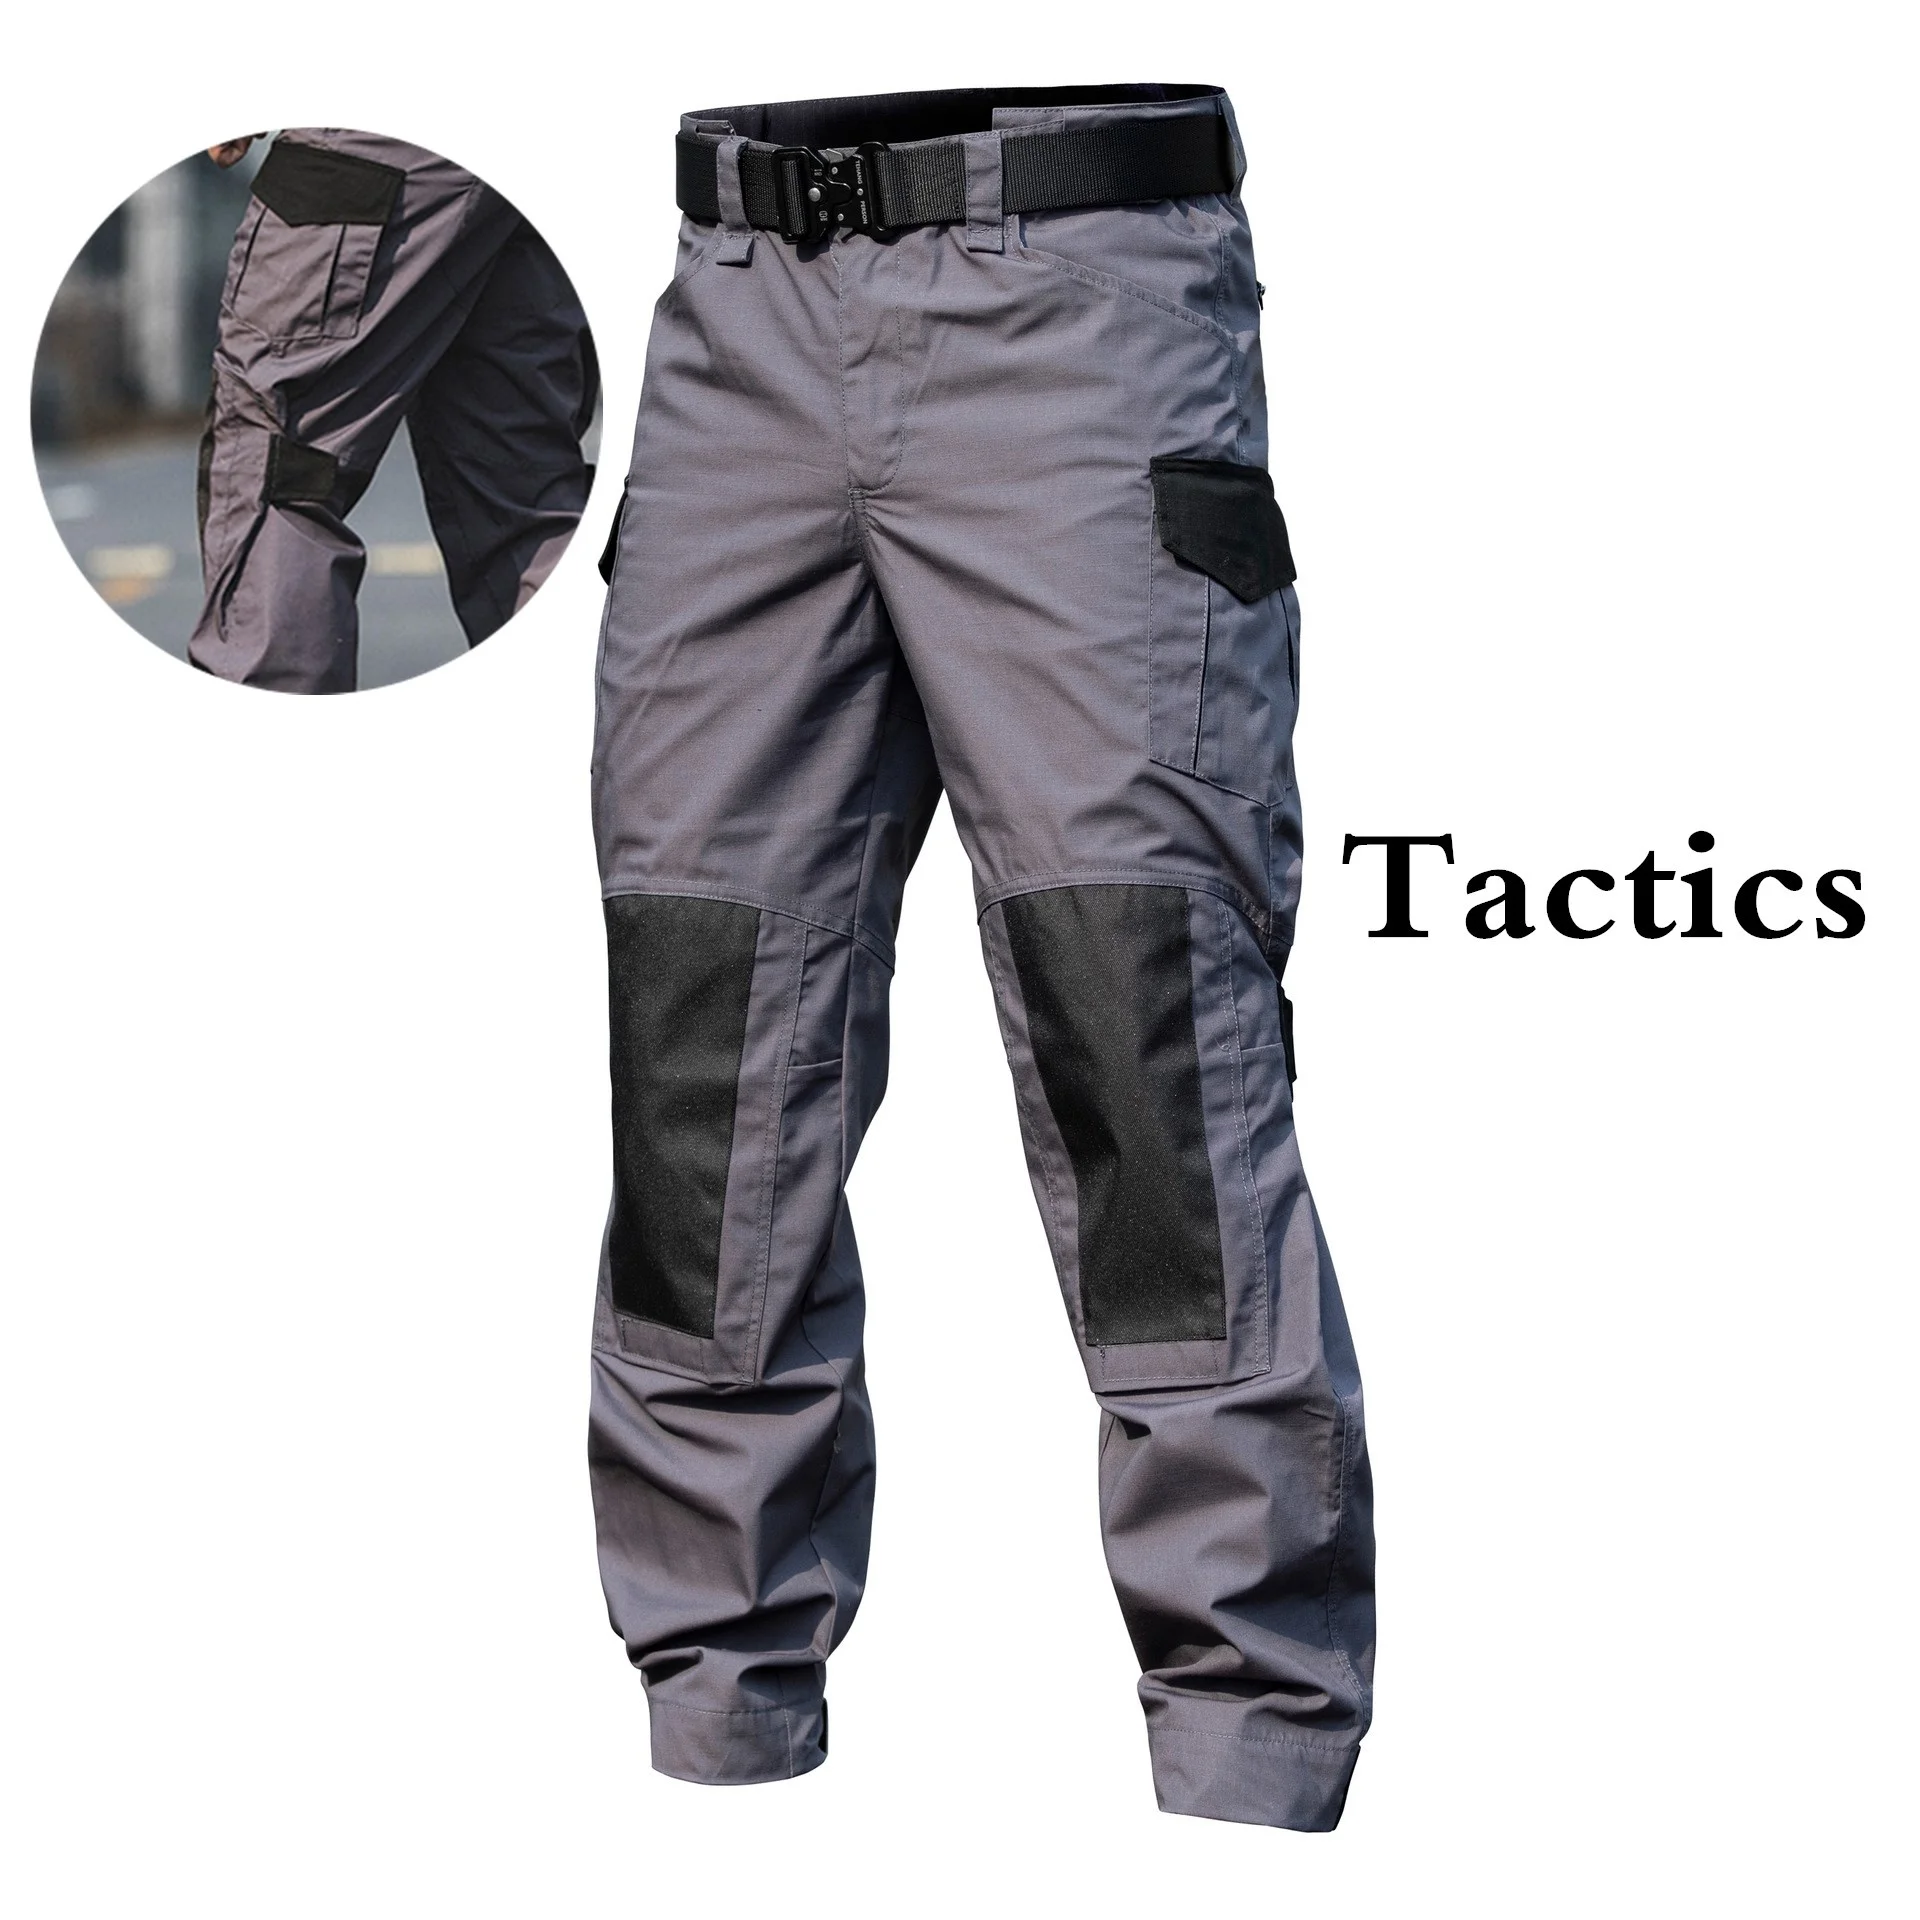 

Outdoor Straight Tactical Cargo Pants Army Fan Men Wear Resisting Water Repellent Trouser Overalls Military Training Combat Pant